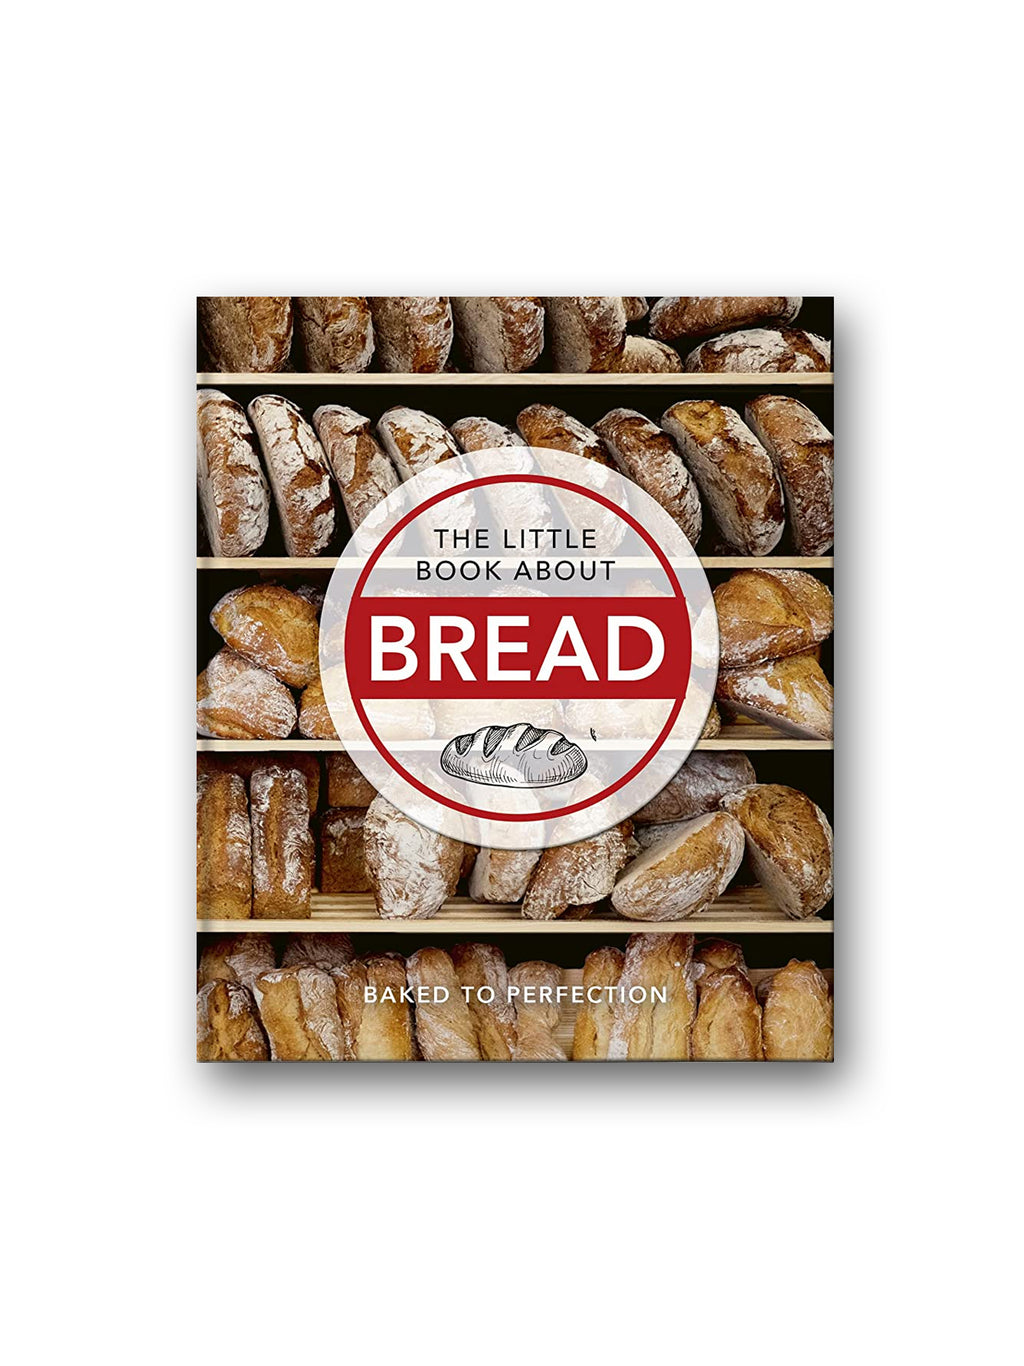 The Little Book About Bread